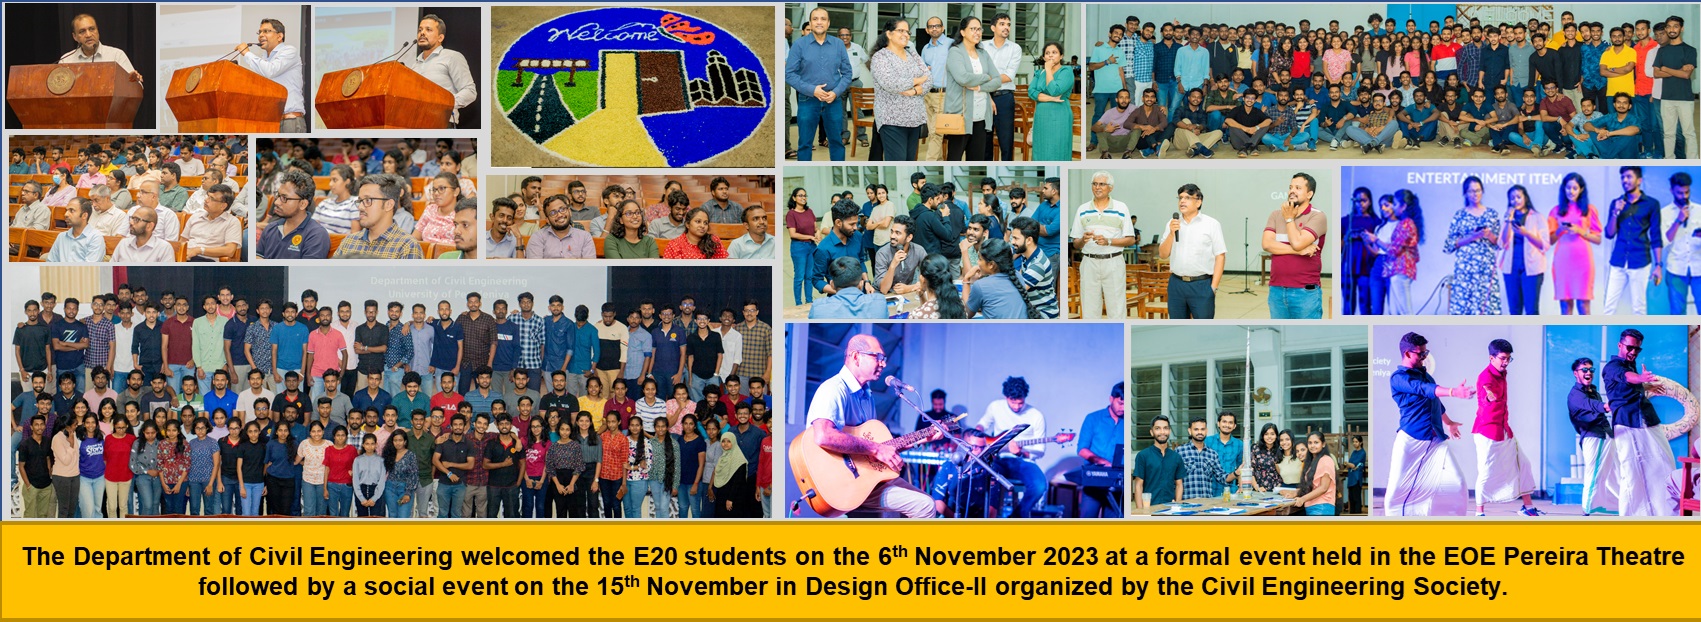 DCE welcomed the E20 students